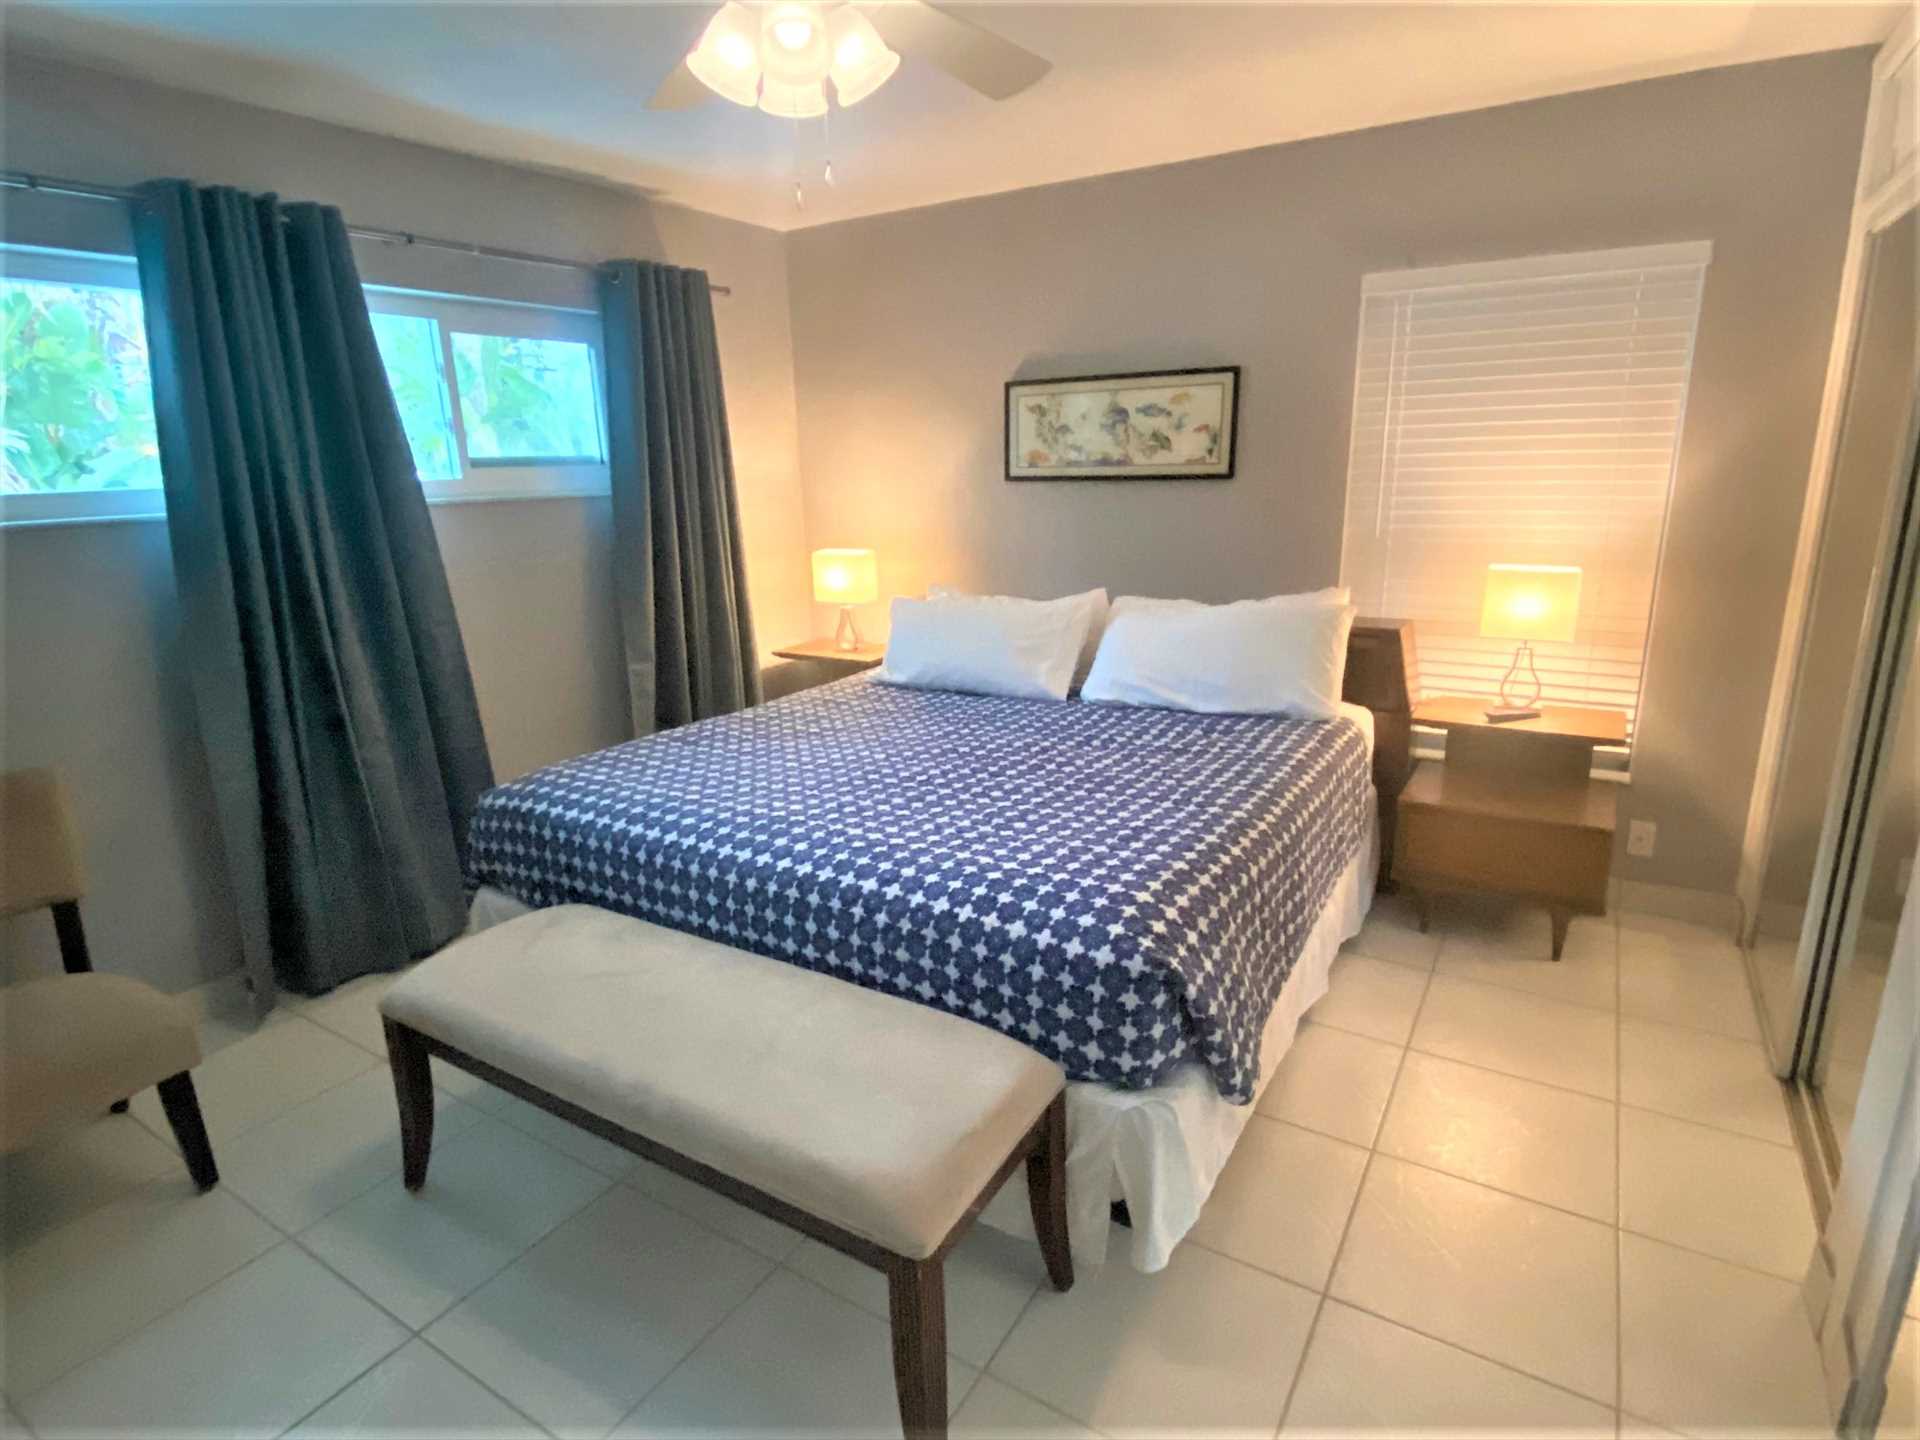 Master bedroom features king bed.